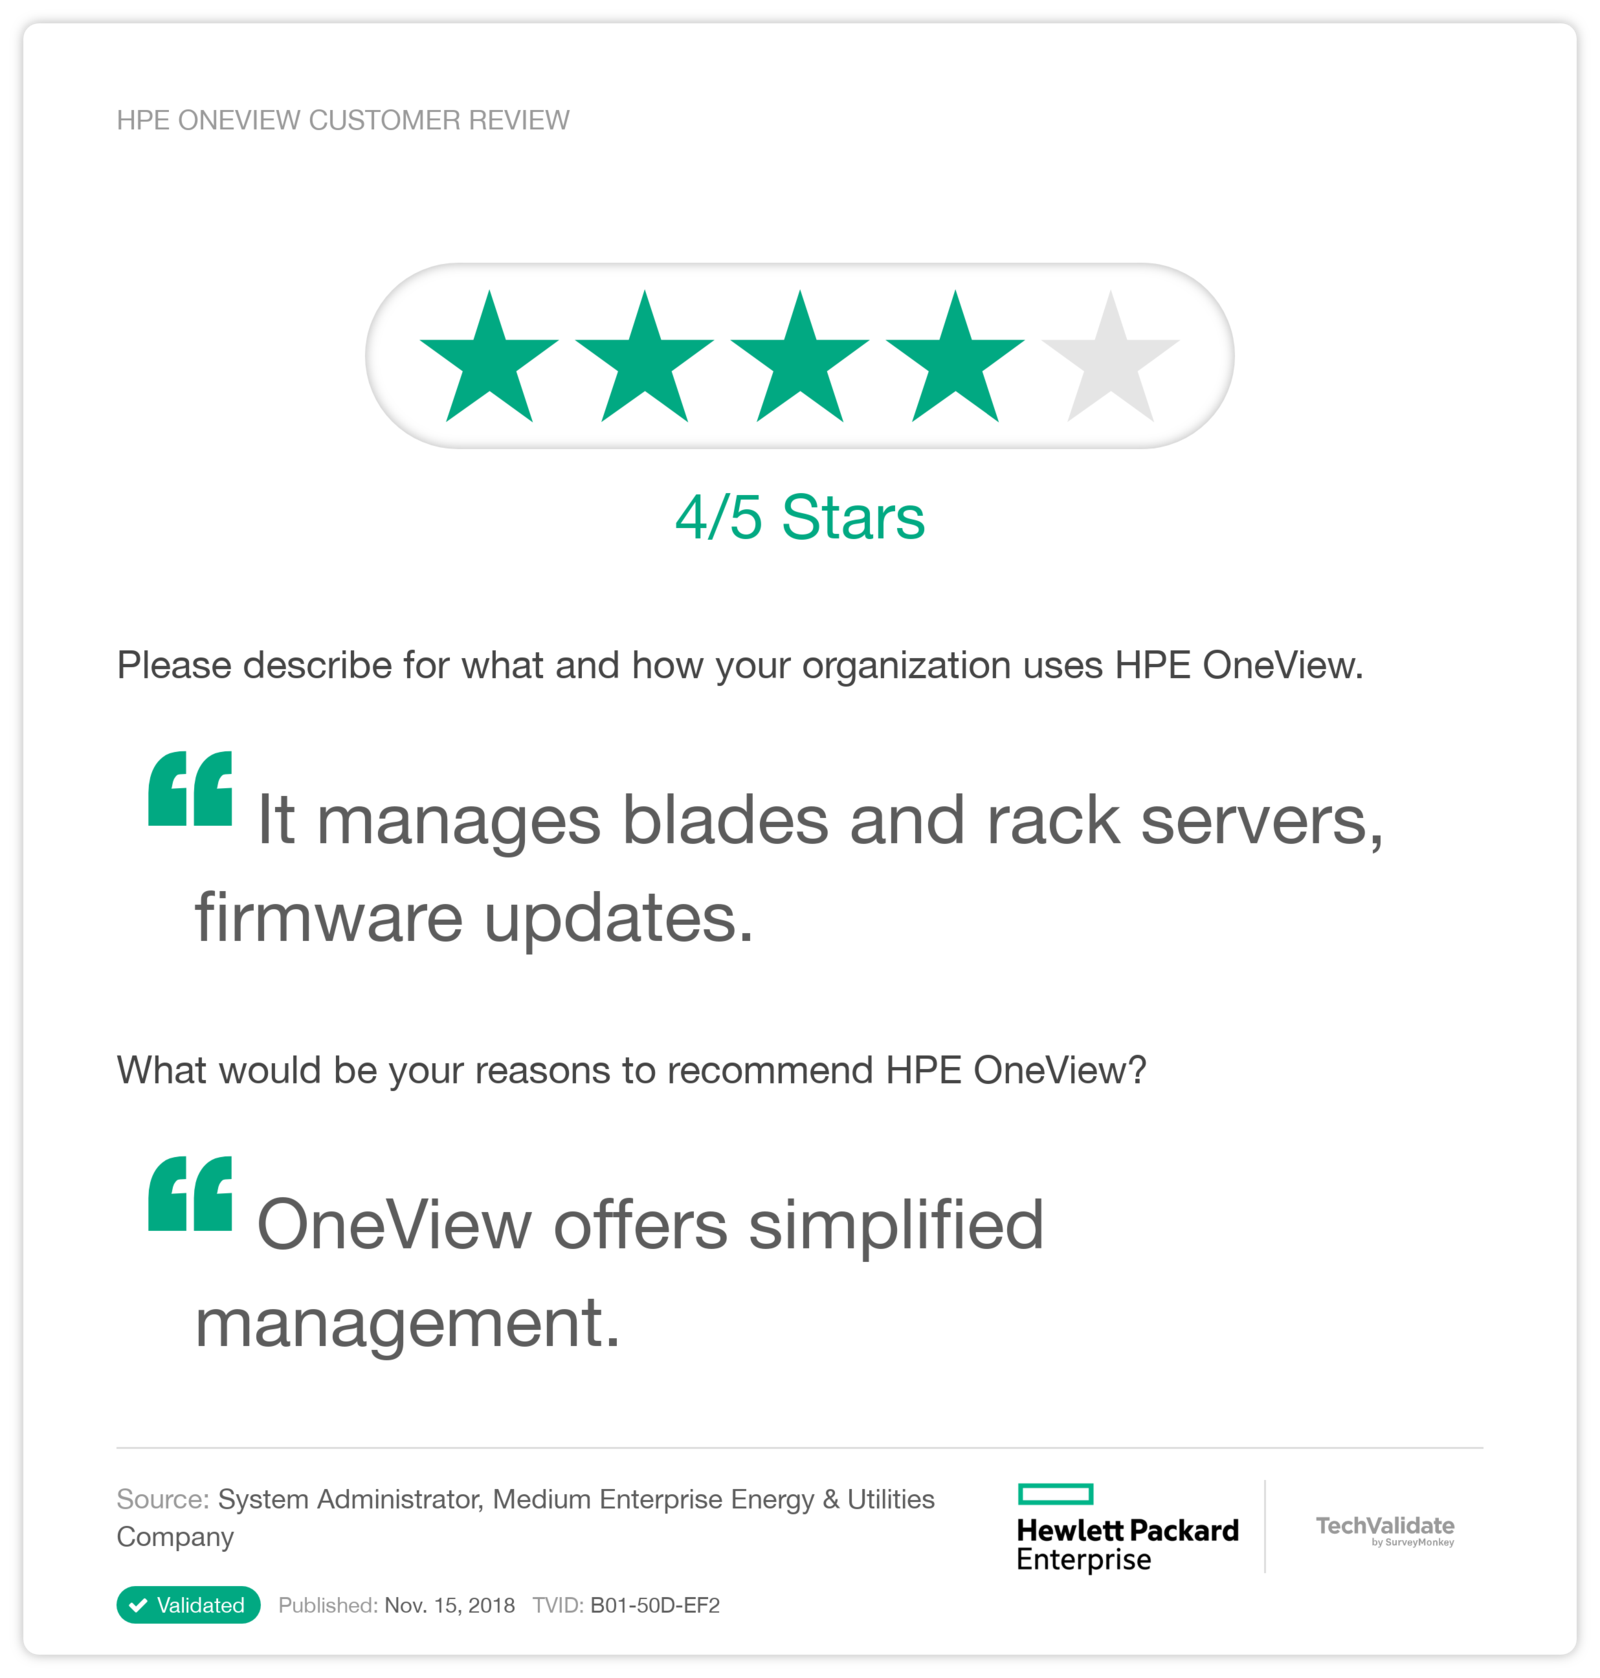 HPE OneView Customer Review